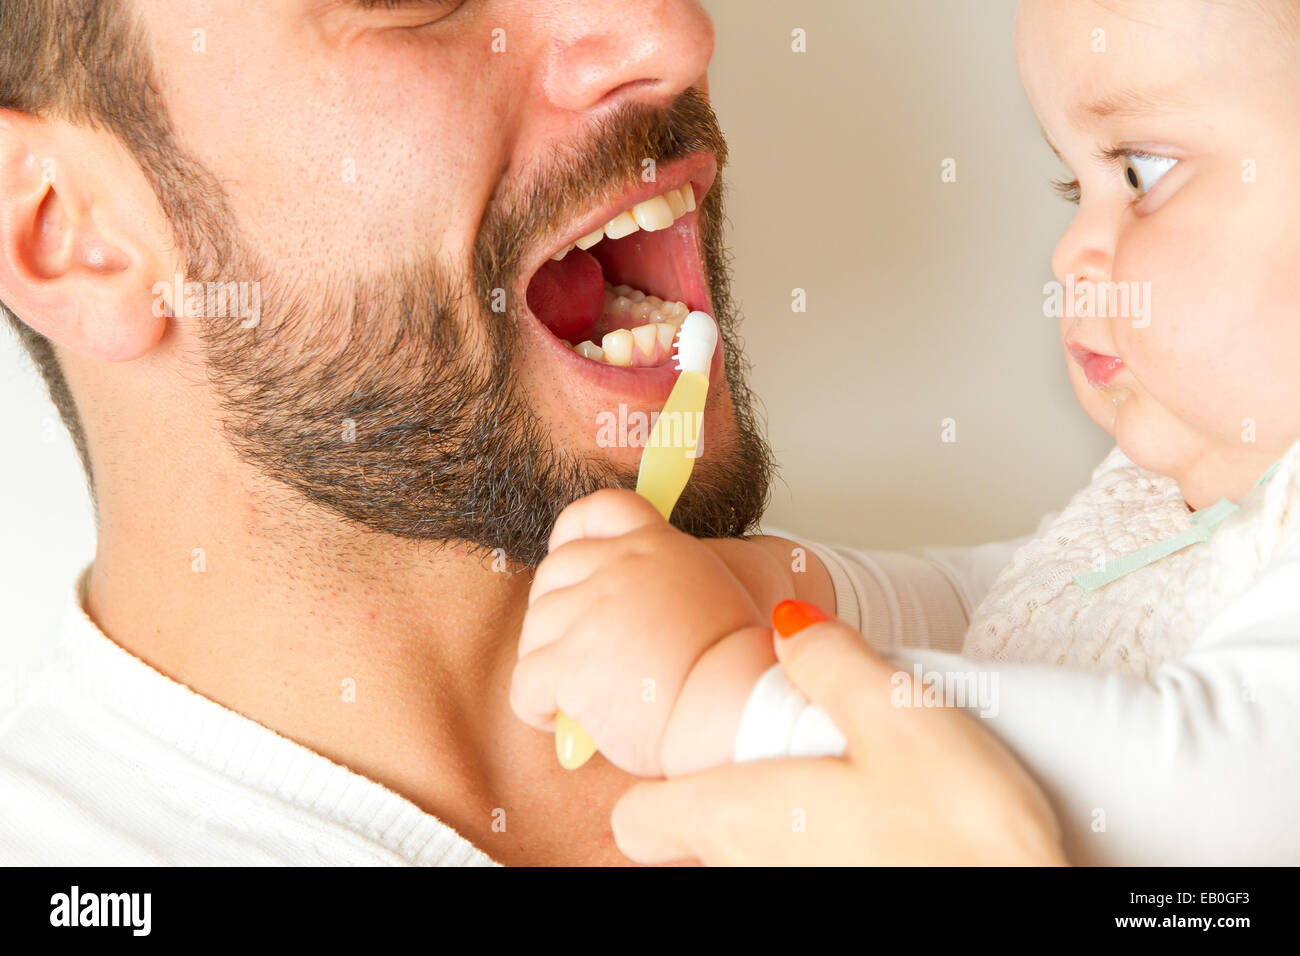 Baby brushing teeth of father Stock Photo